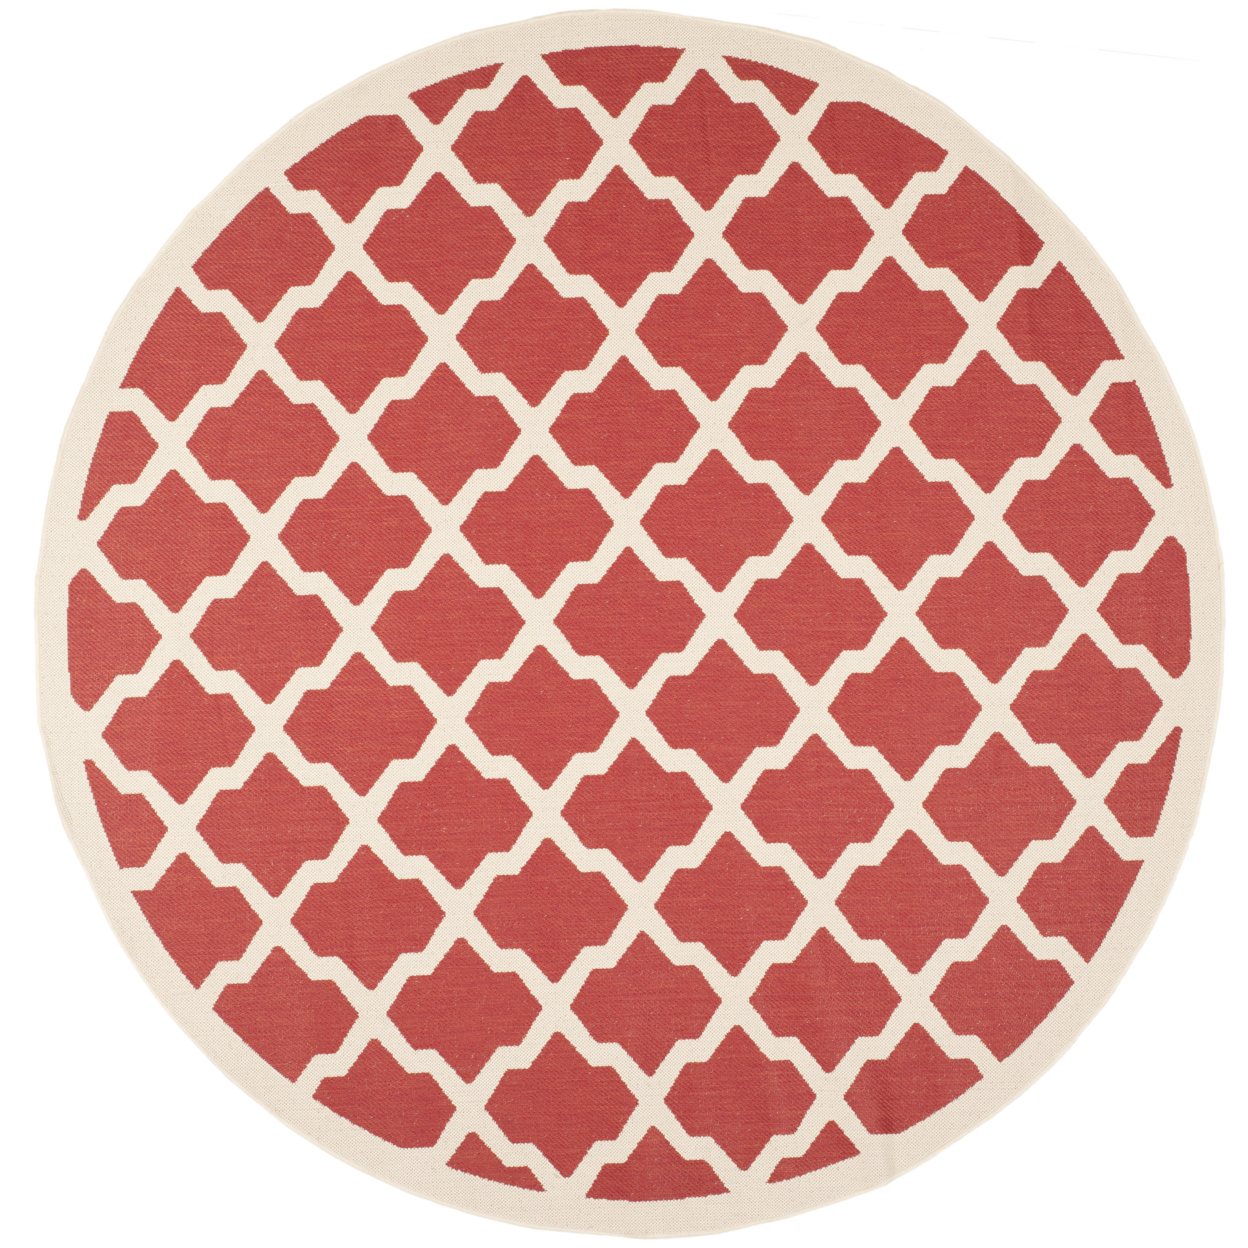 SAFAVIEH Outdoor CY6903-248 Courtyard Collection Red / Bone Rug - 6' 7 X 9' 6